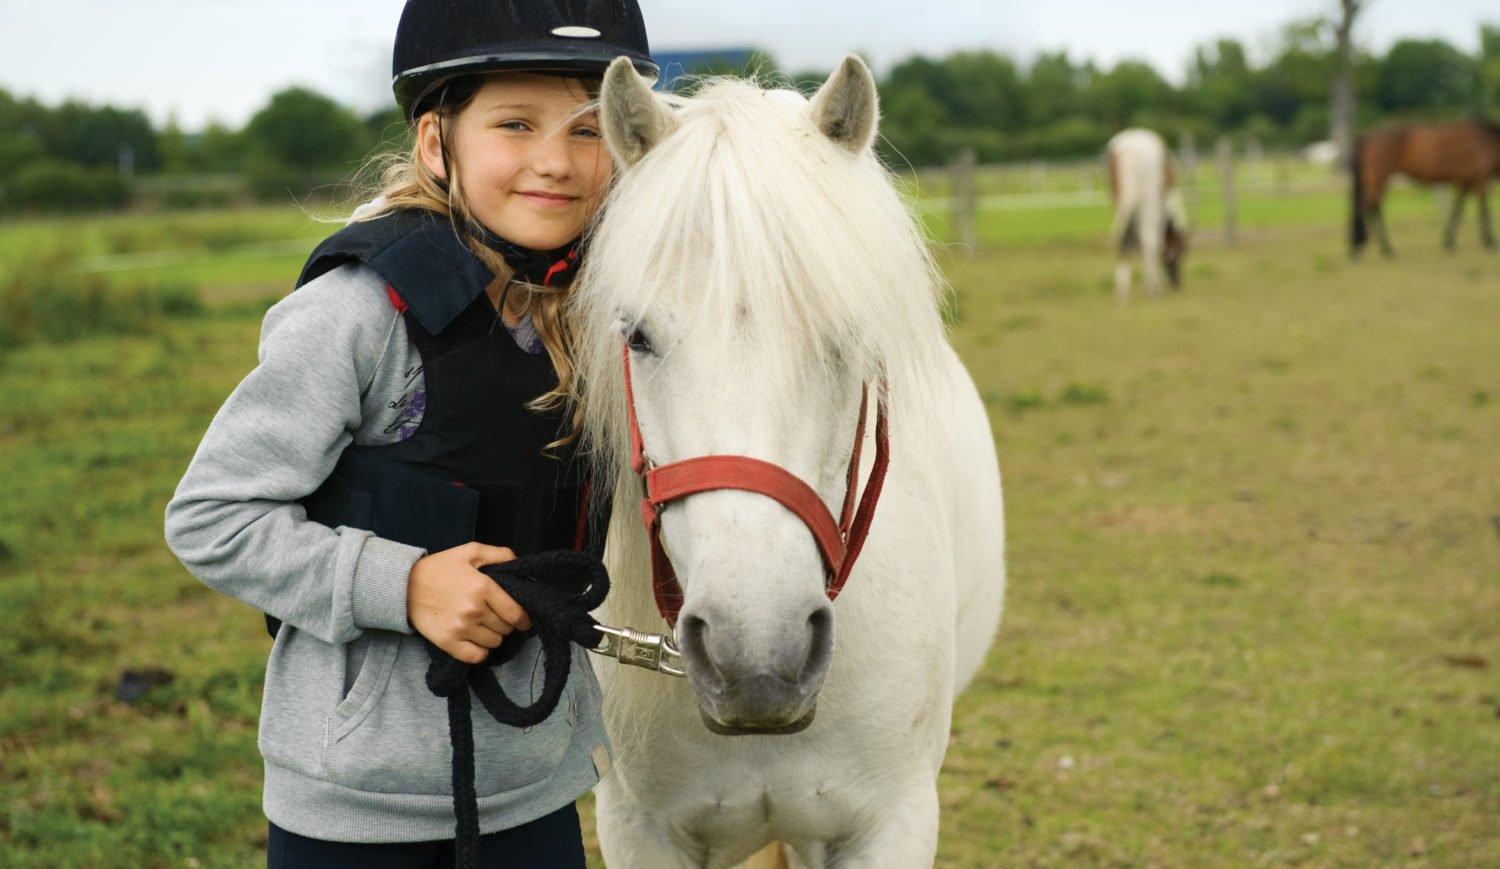 Many horse farms in Lower Saxony offer lessons for kids © Shestakoff